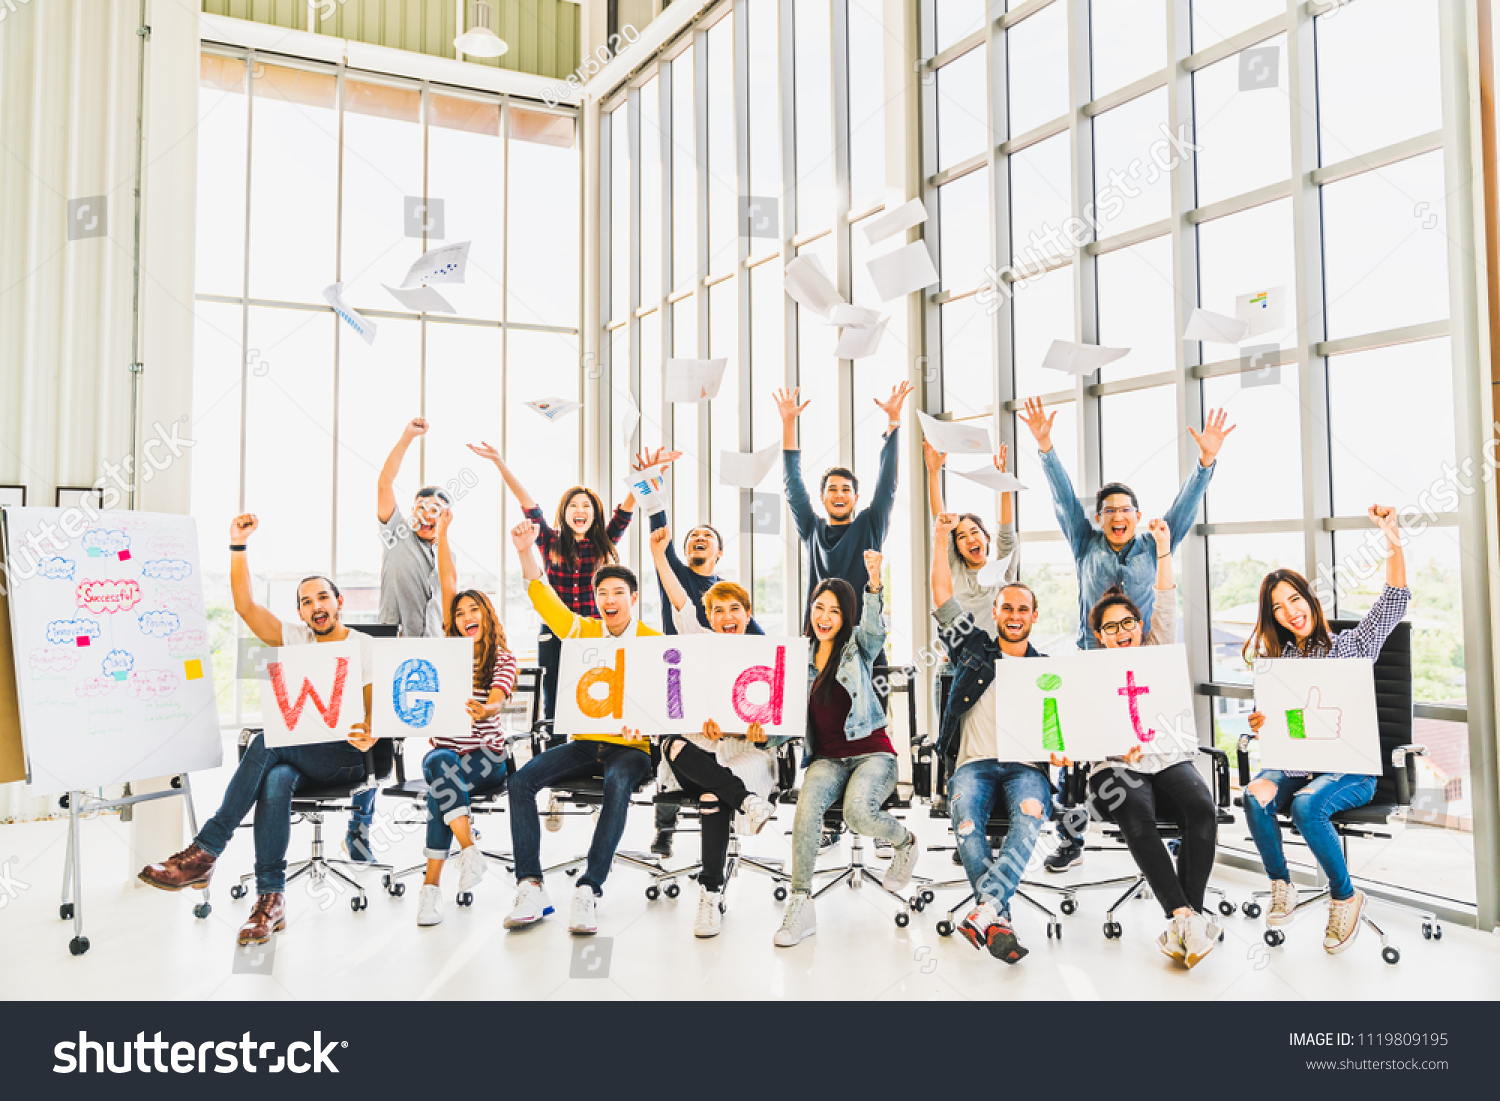 Multiethnic diverse group of happy business people cheering together, celebrate project success with papers wrote words We did it. Coworkers teamwork, career job achievement, or small business concept #1119809195